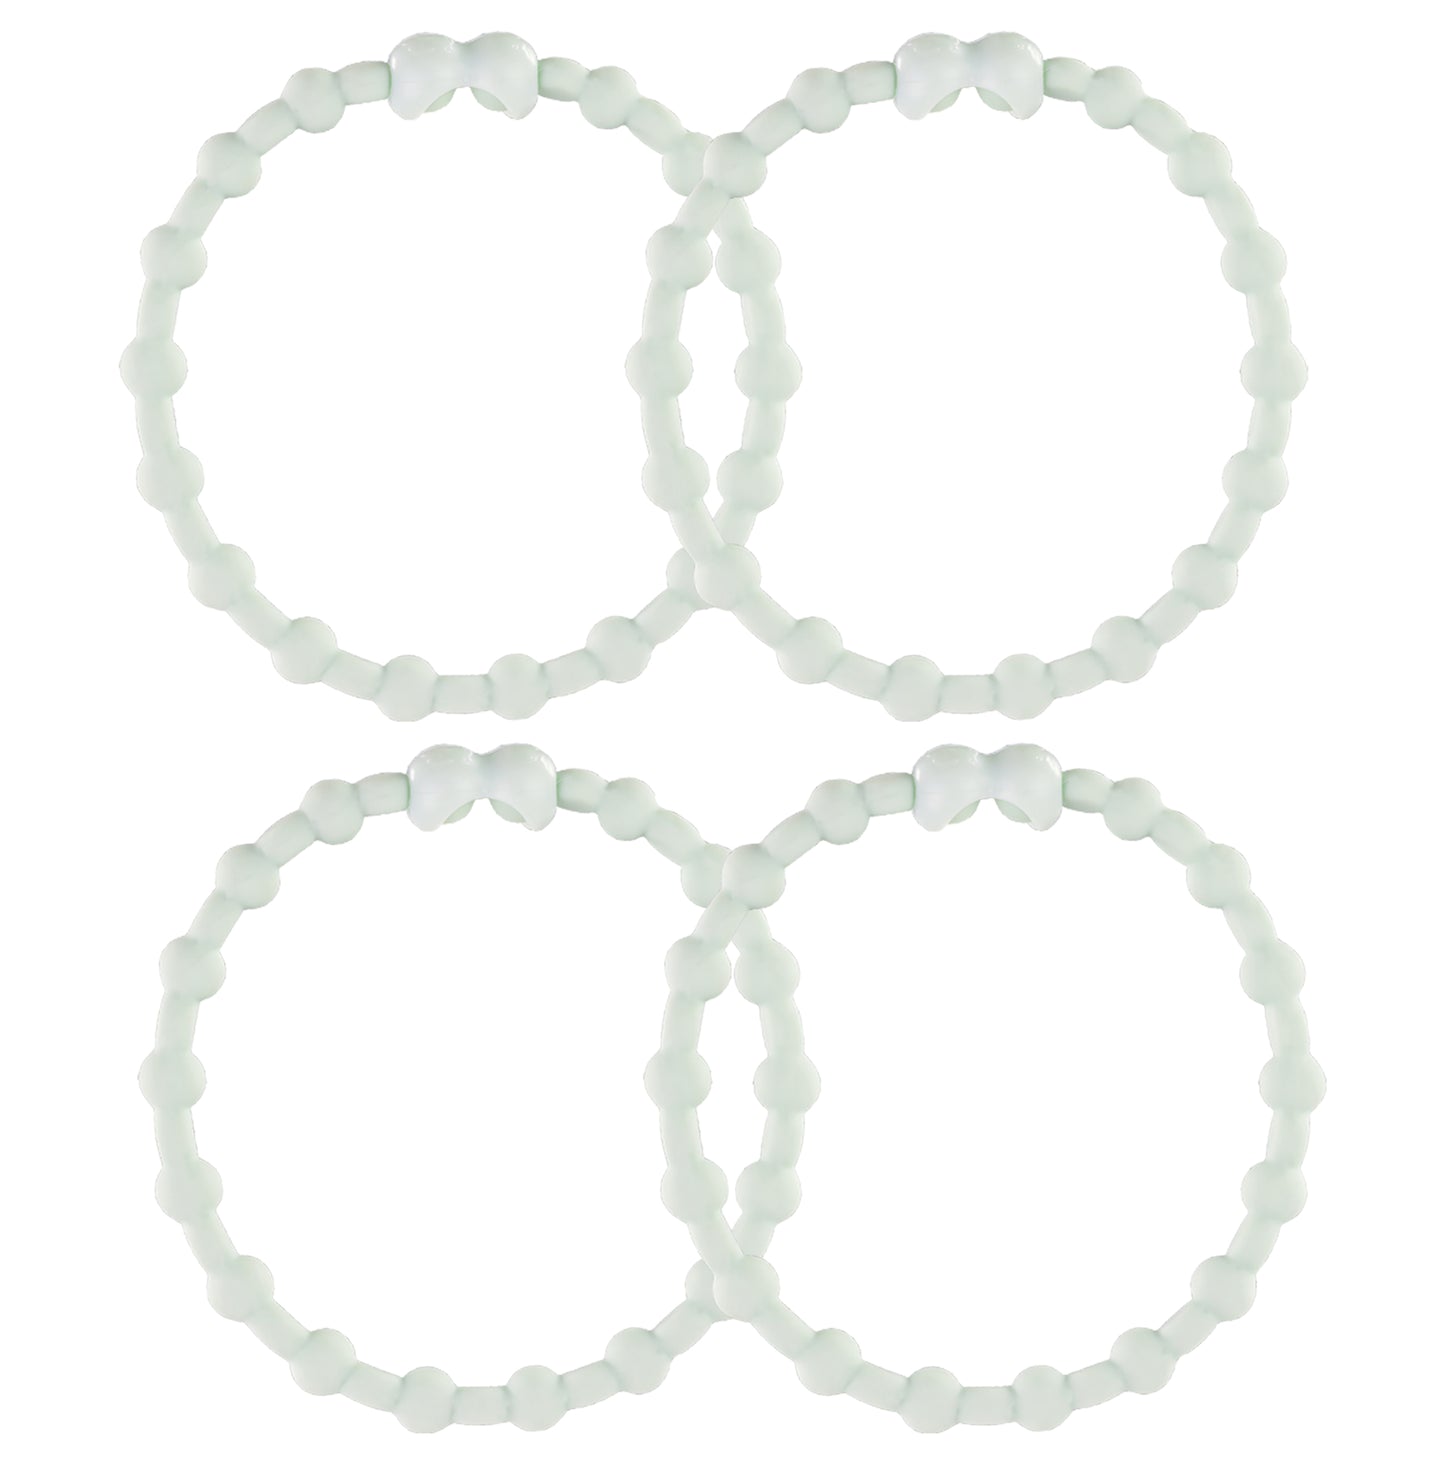 Soft Mint PRO Hair Ties (4-Pack): Embrace Tranquility and Style